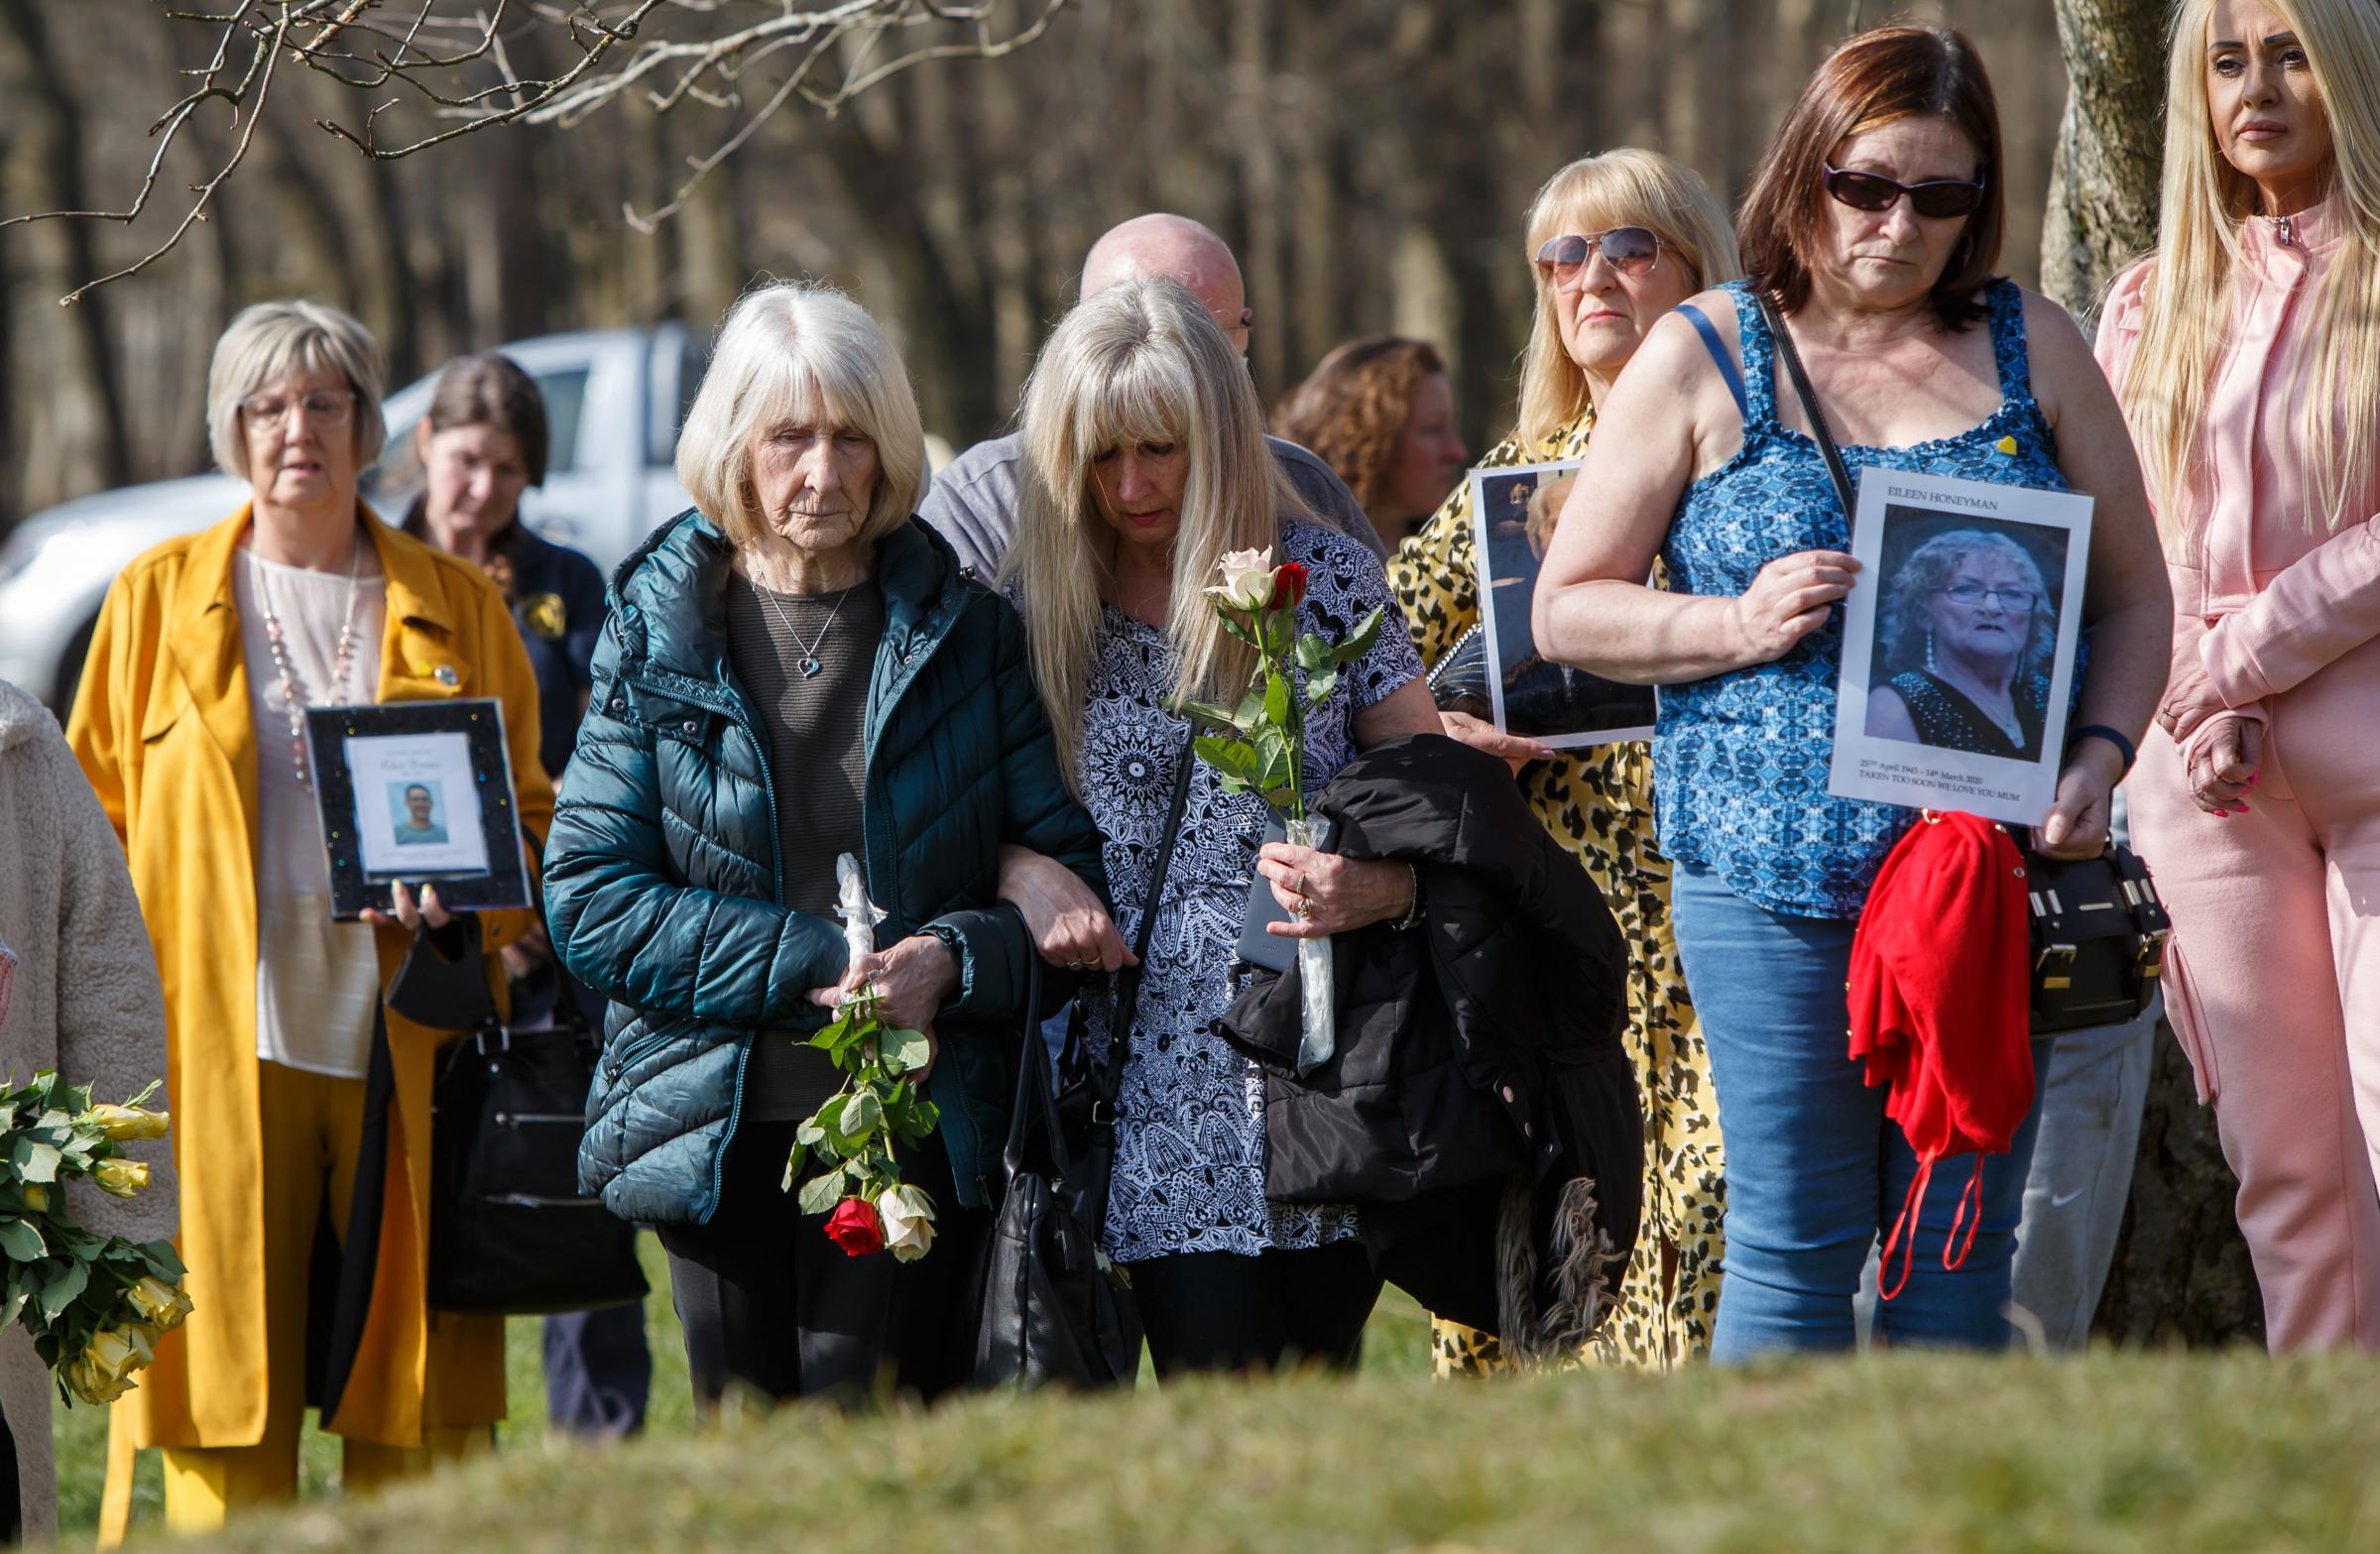 People pictured during a minutes silence for those lost to Covid at Riverside Grove in Pollok Country Park in Glasgow. The Heralds covid memorial artist Alec Finlay has developed a concept which will involve a series of tree supports installed in